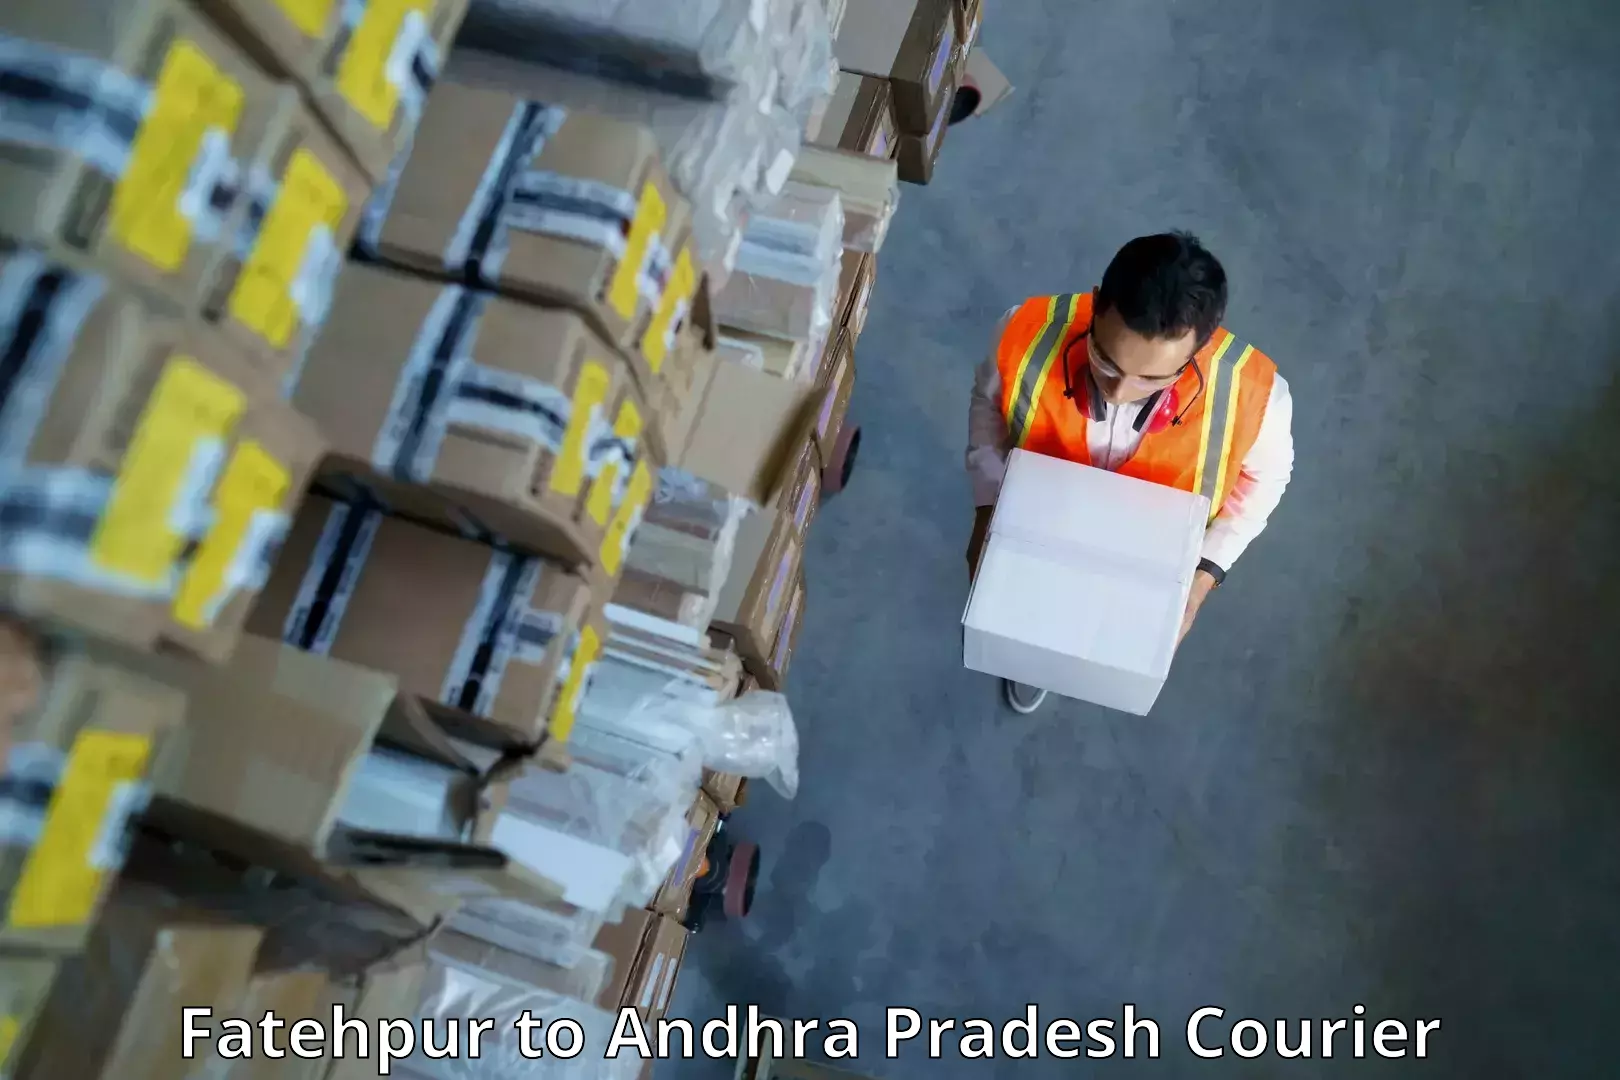 Courier service innovation in Fatehpur to Tripuranthakam